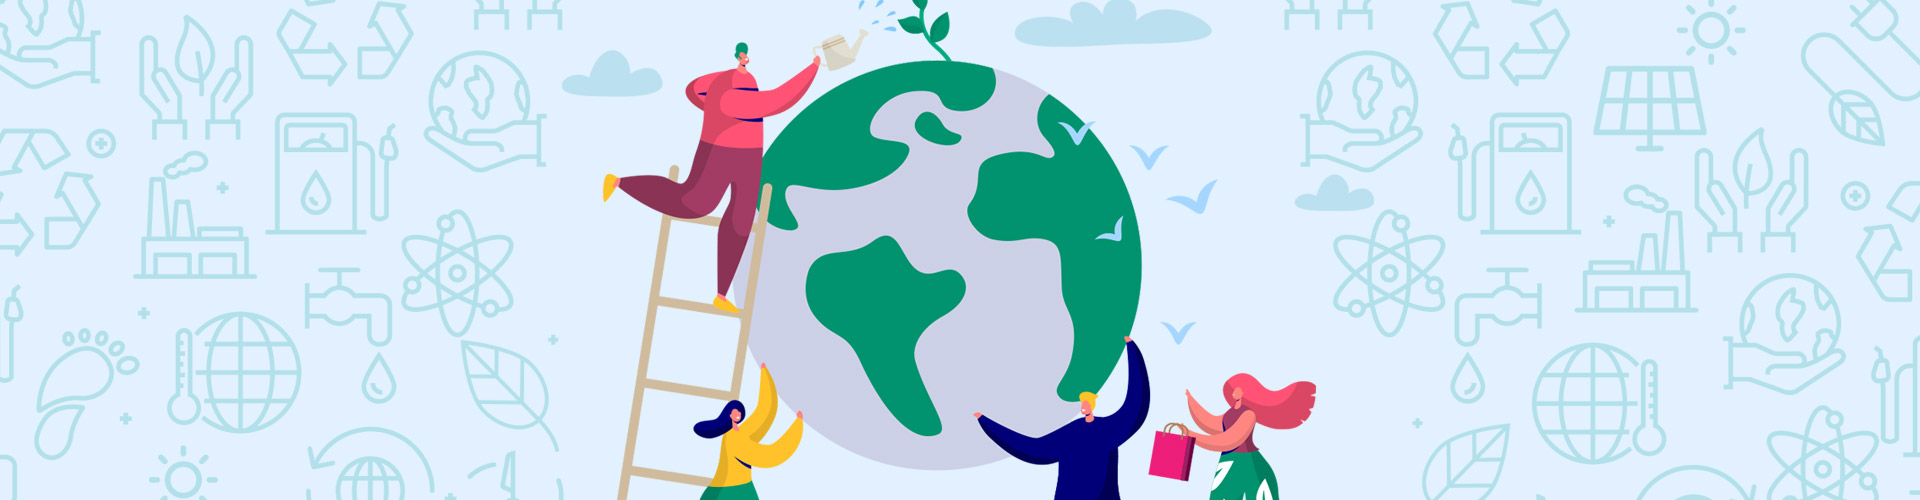 A New Set of Values is Changing Shopping Life blog banner featuring vector illustration of a group of people watering and planting on a globe